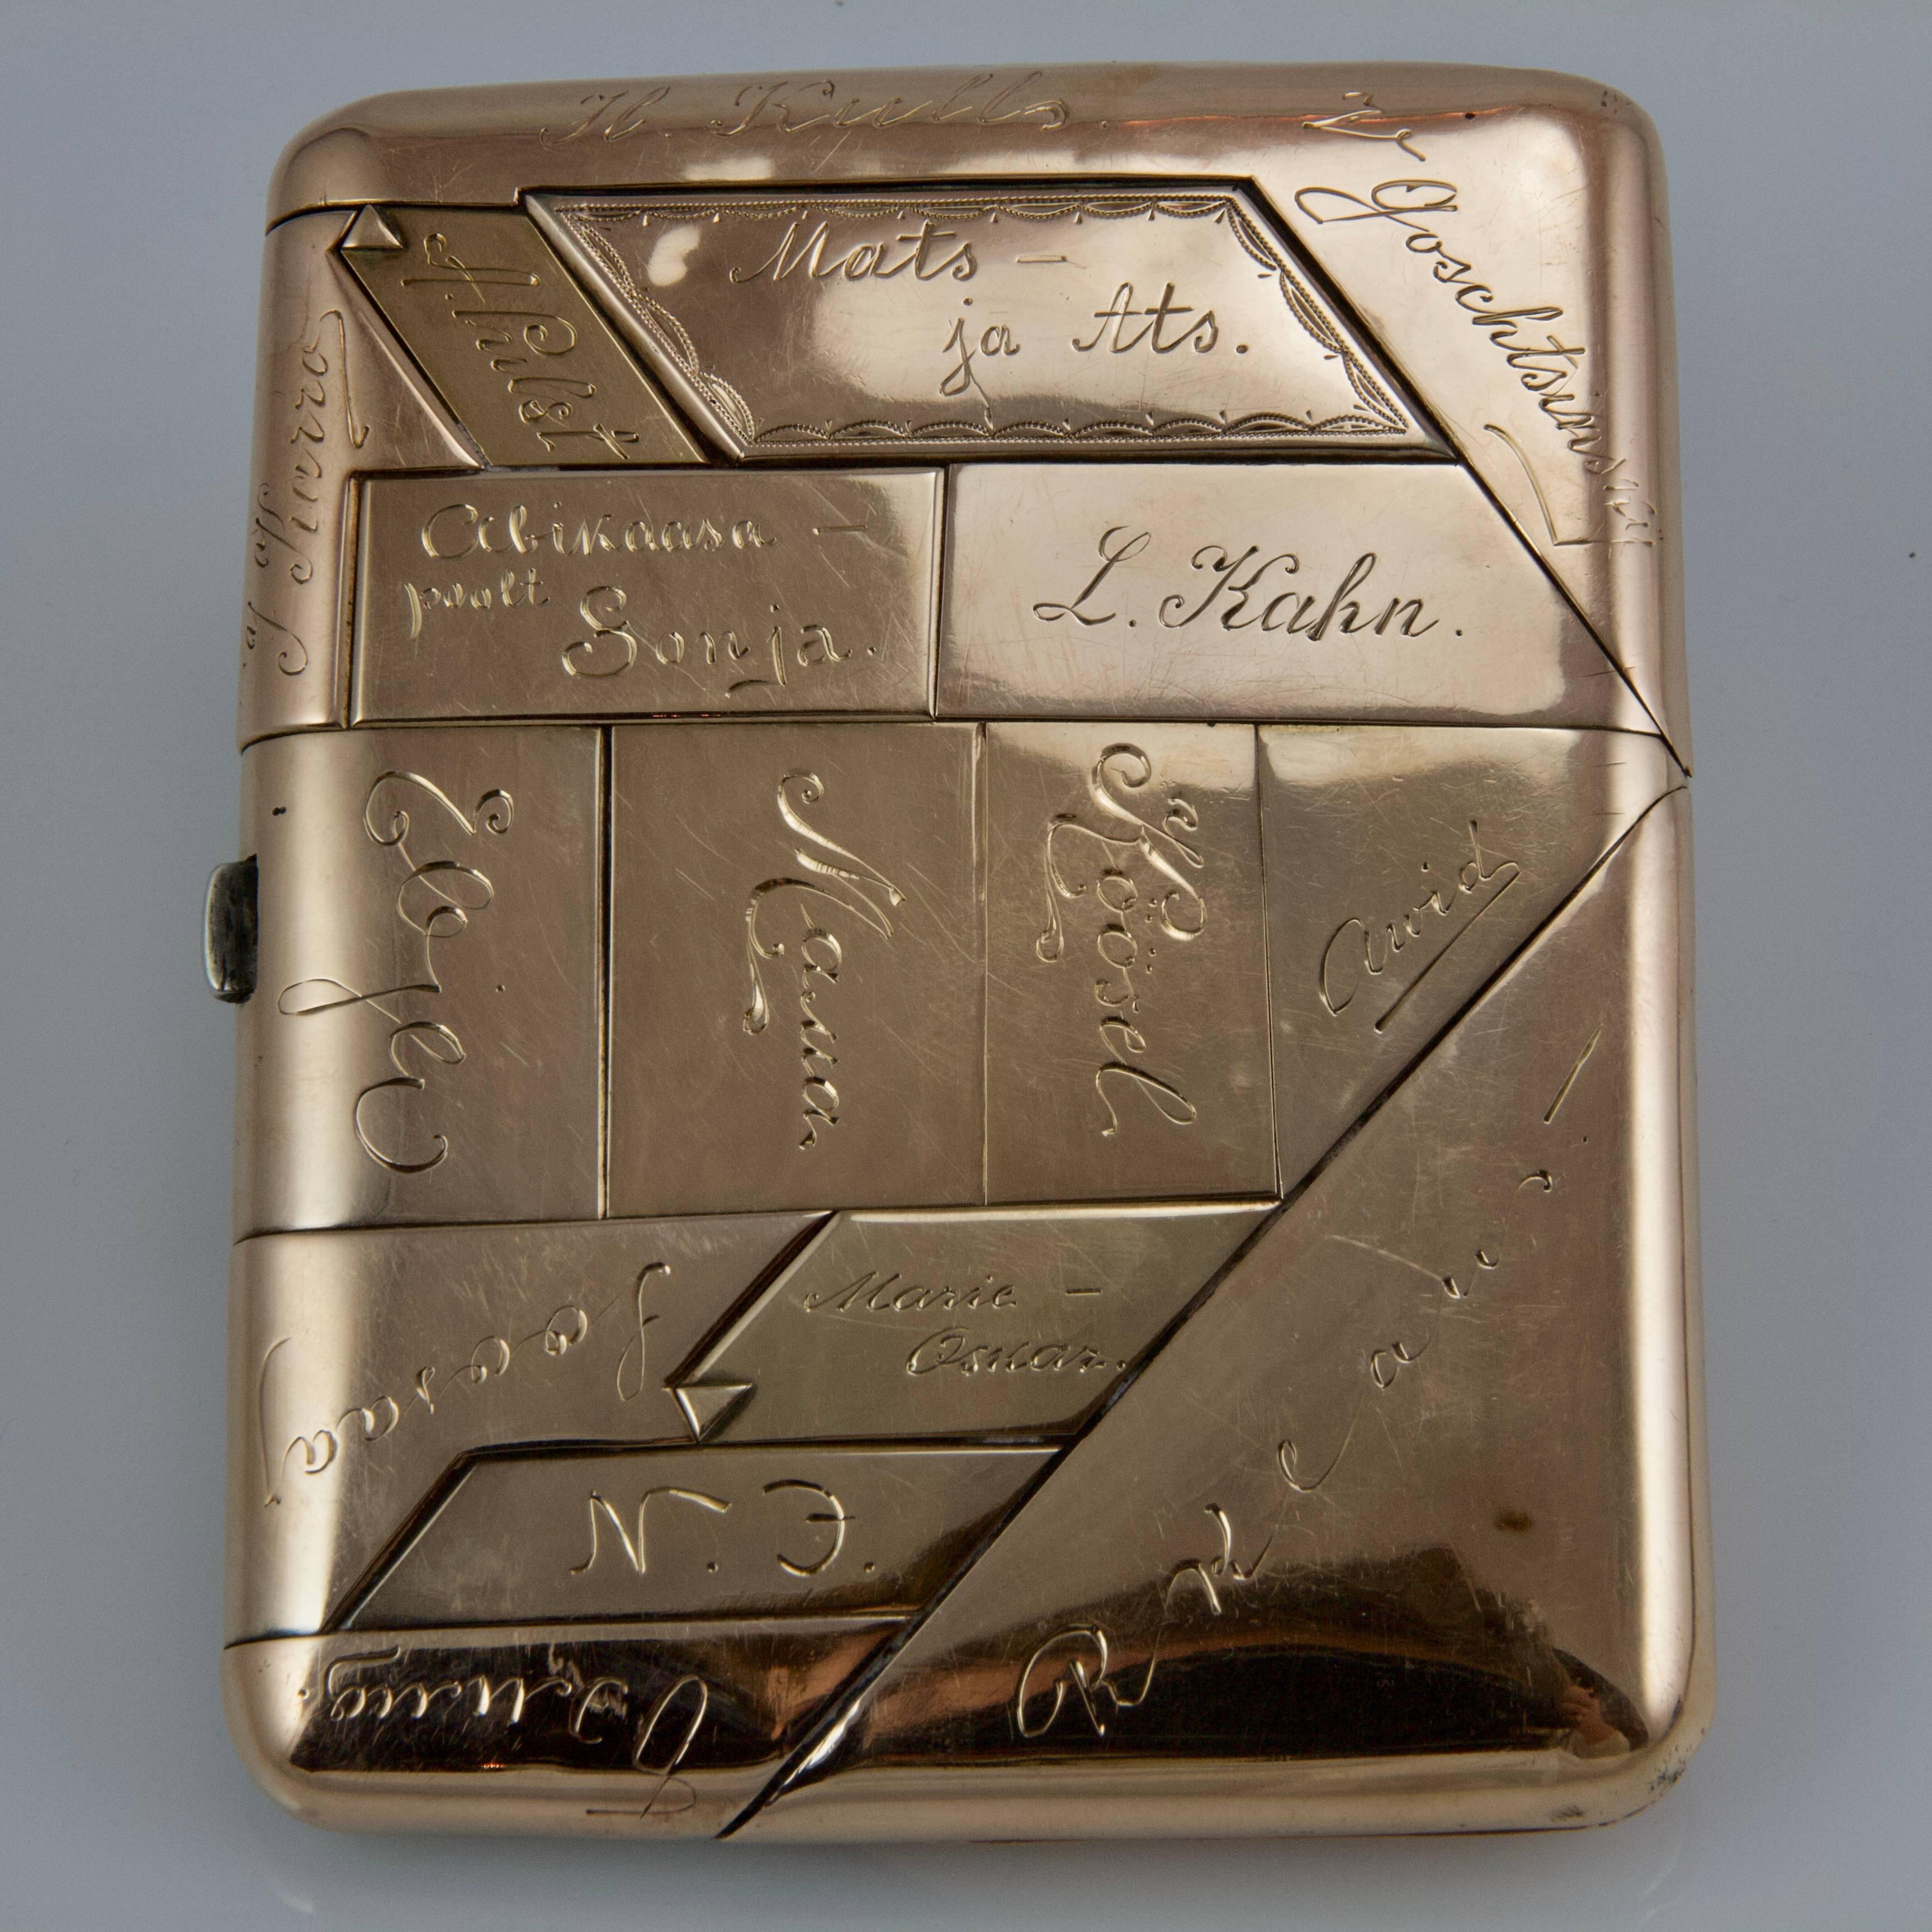 Unusual silver cigarette-case, almost totally covered by 23 thick and heavy pink gold labels or stamps engraved with an handwritten signatures (Charlie Farrell, Edward Ustrissov, F Butte, N Raist, Manza, Fritz, H Kull, Mats ja Ats, Macha, Köösel, L